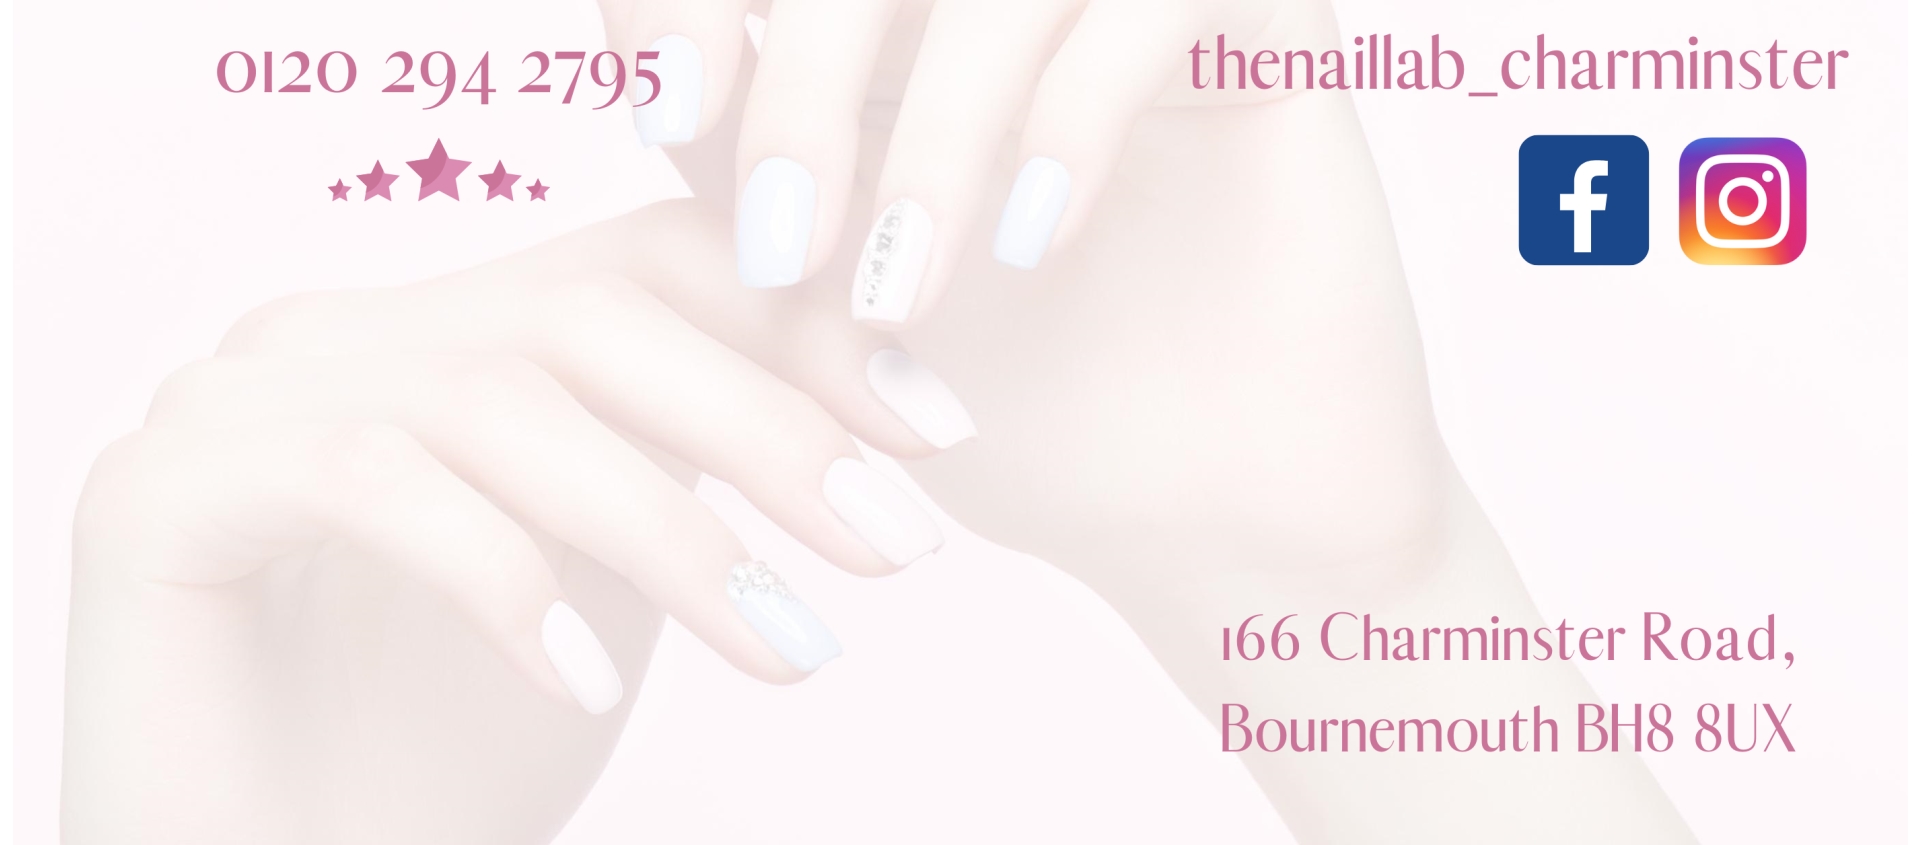 Butterfly Nails & Beauty - With the correct treatment and nail technician  can achieve anything ❤️ #naturalnailspecialist#bournemouth #kinson#northbourne#nailsalon#butterflynailsandbeauty | Facebook